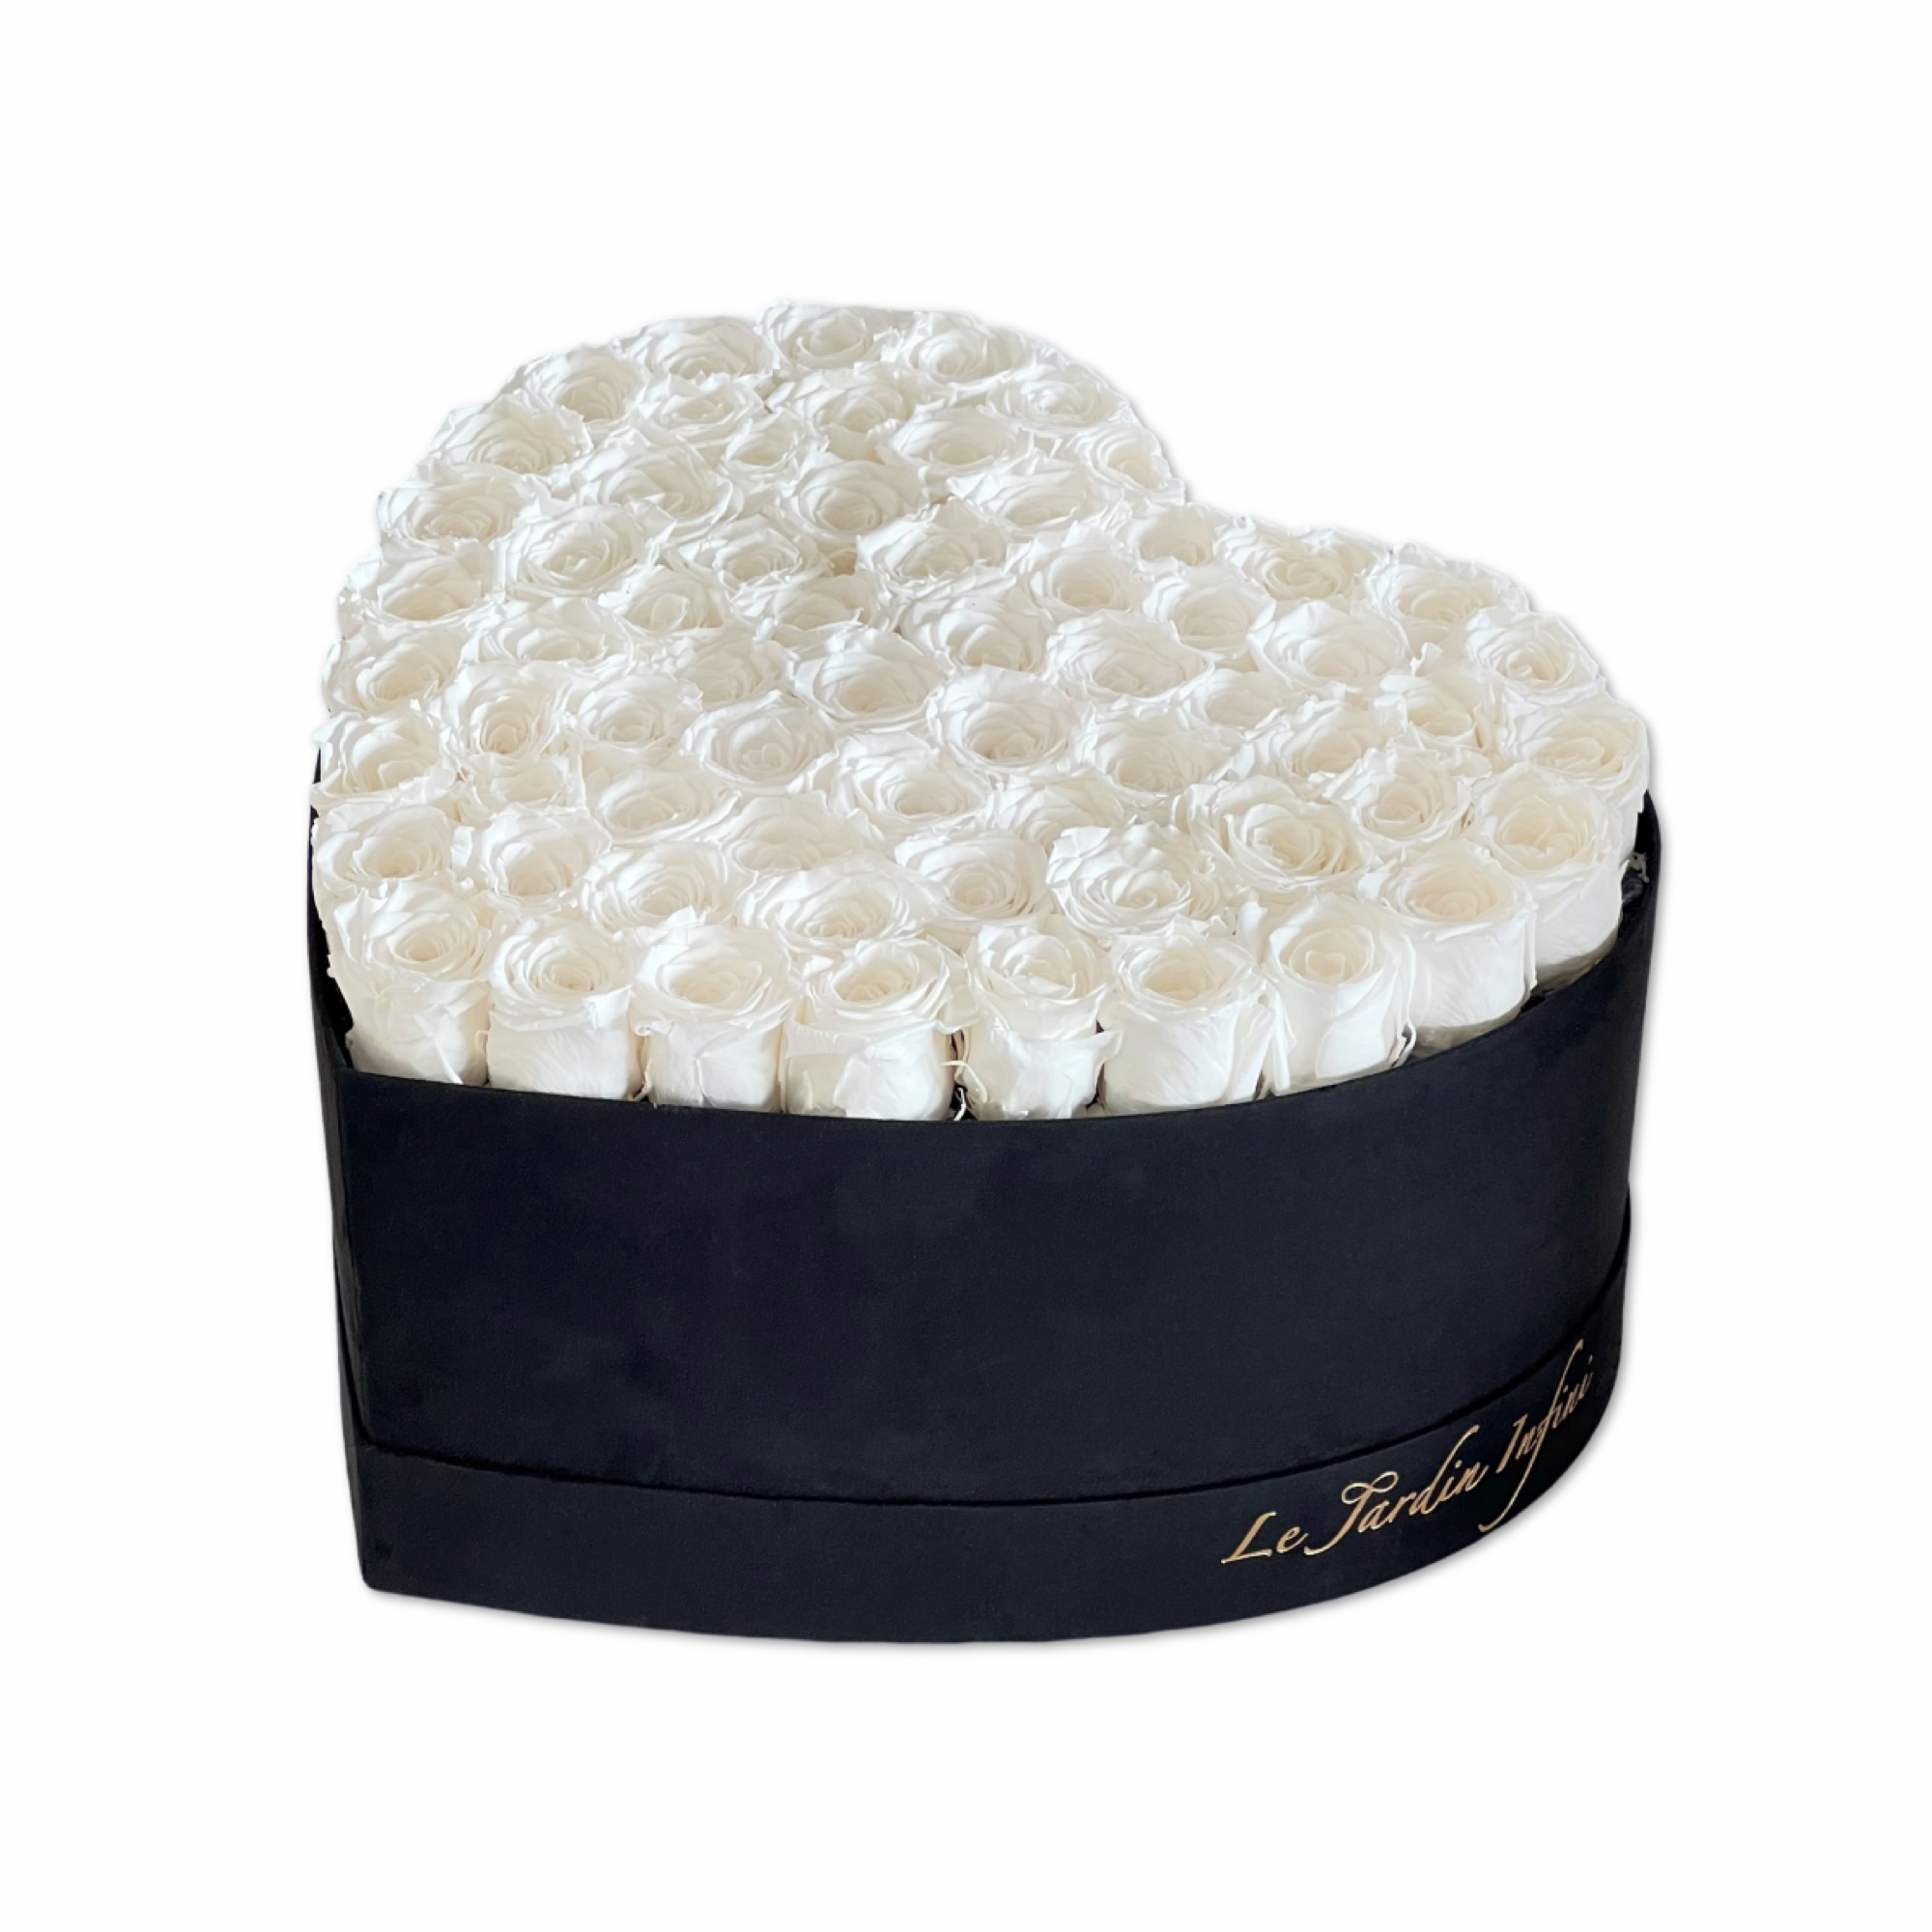 65-75 White Preserved Roses In A Heart Shaped Box- Medium Heart Luxury Black Suede Box